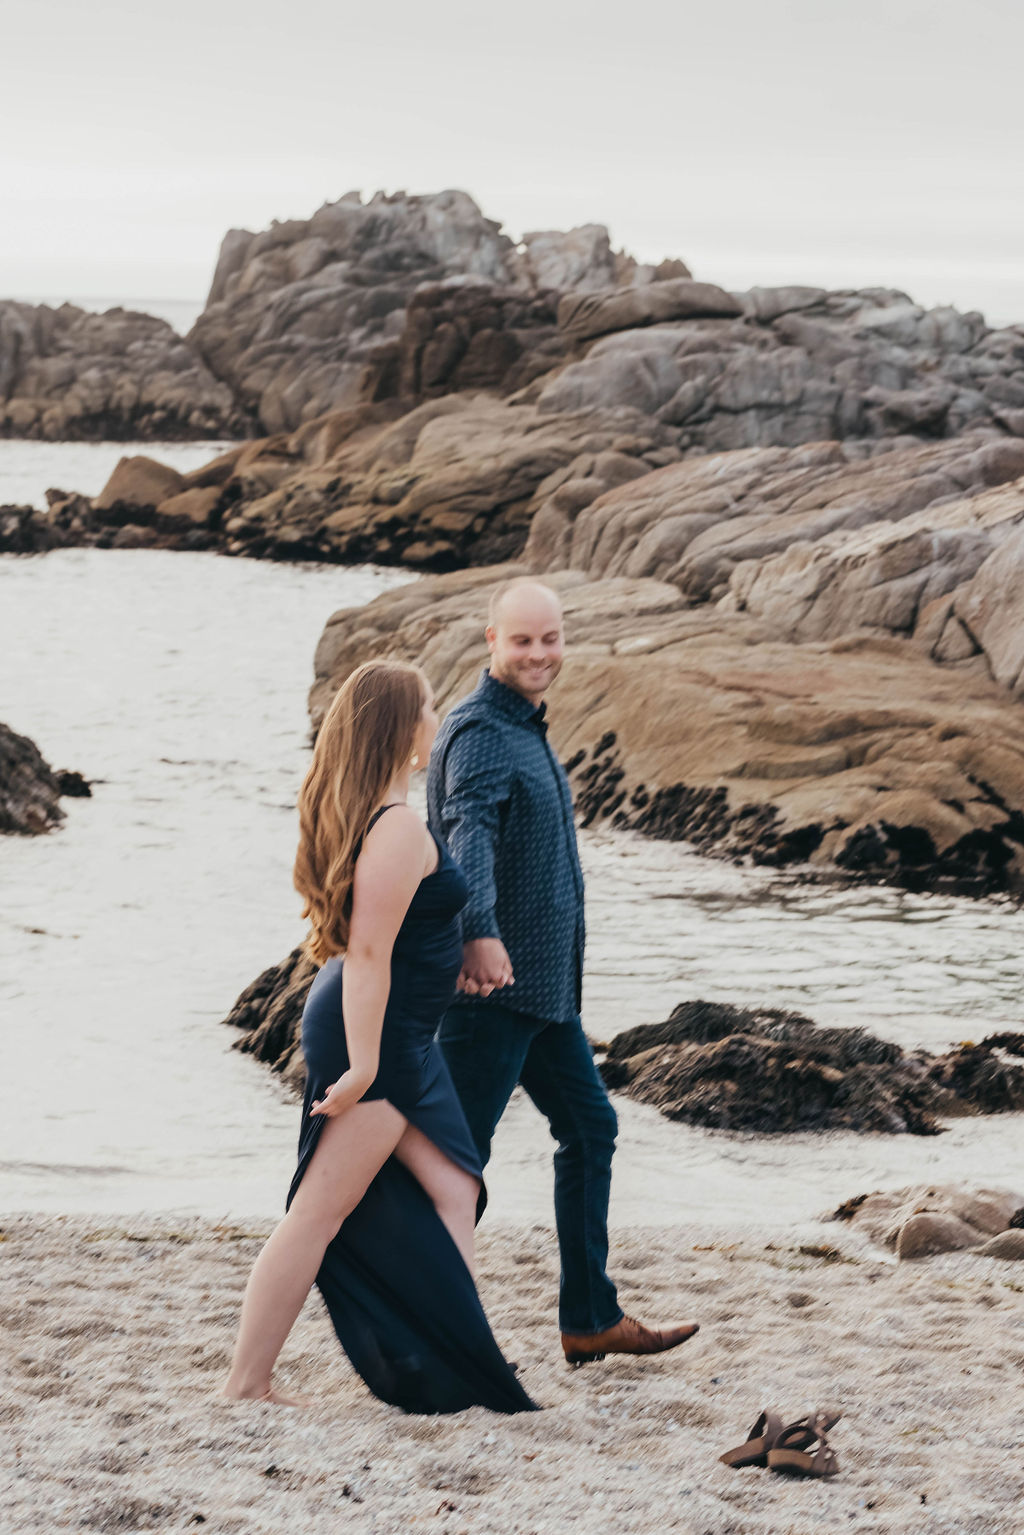 A couple stands close together embracing on a rocky beach with the ocean and large rocks in the background.